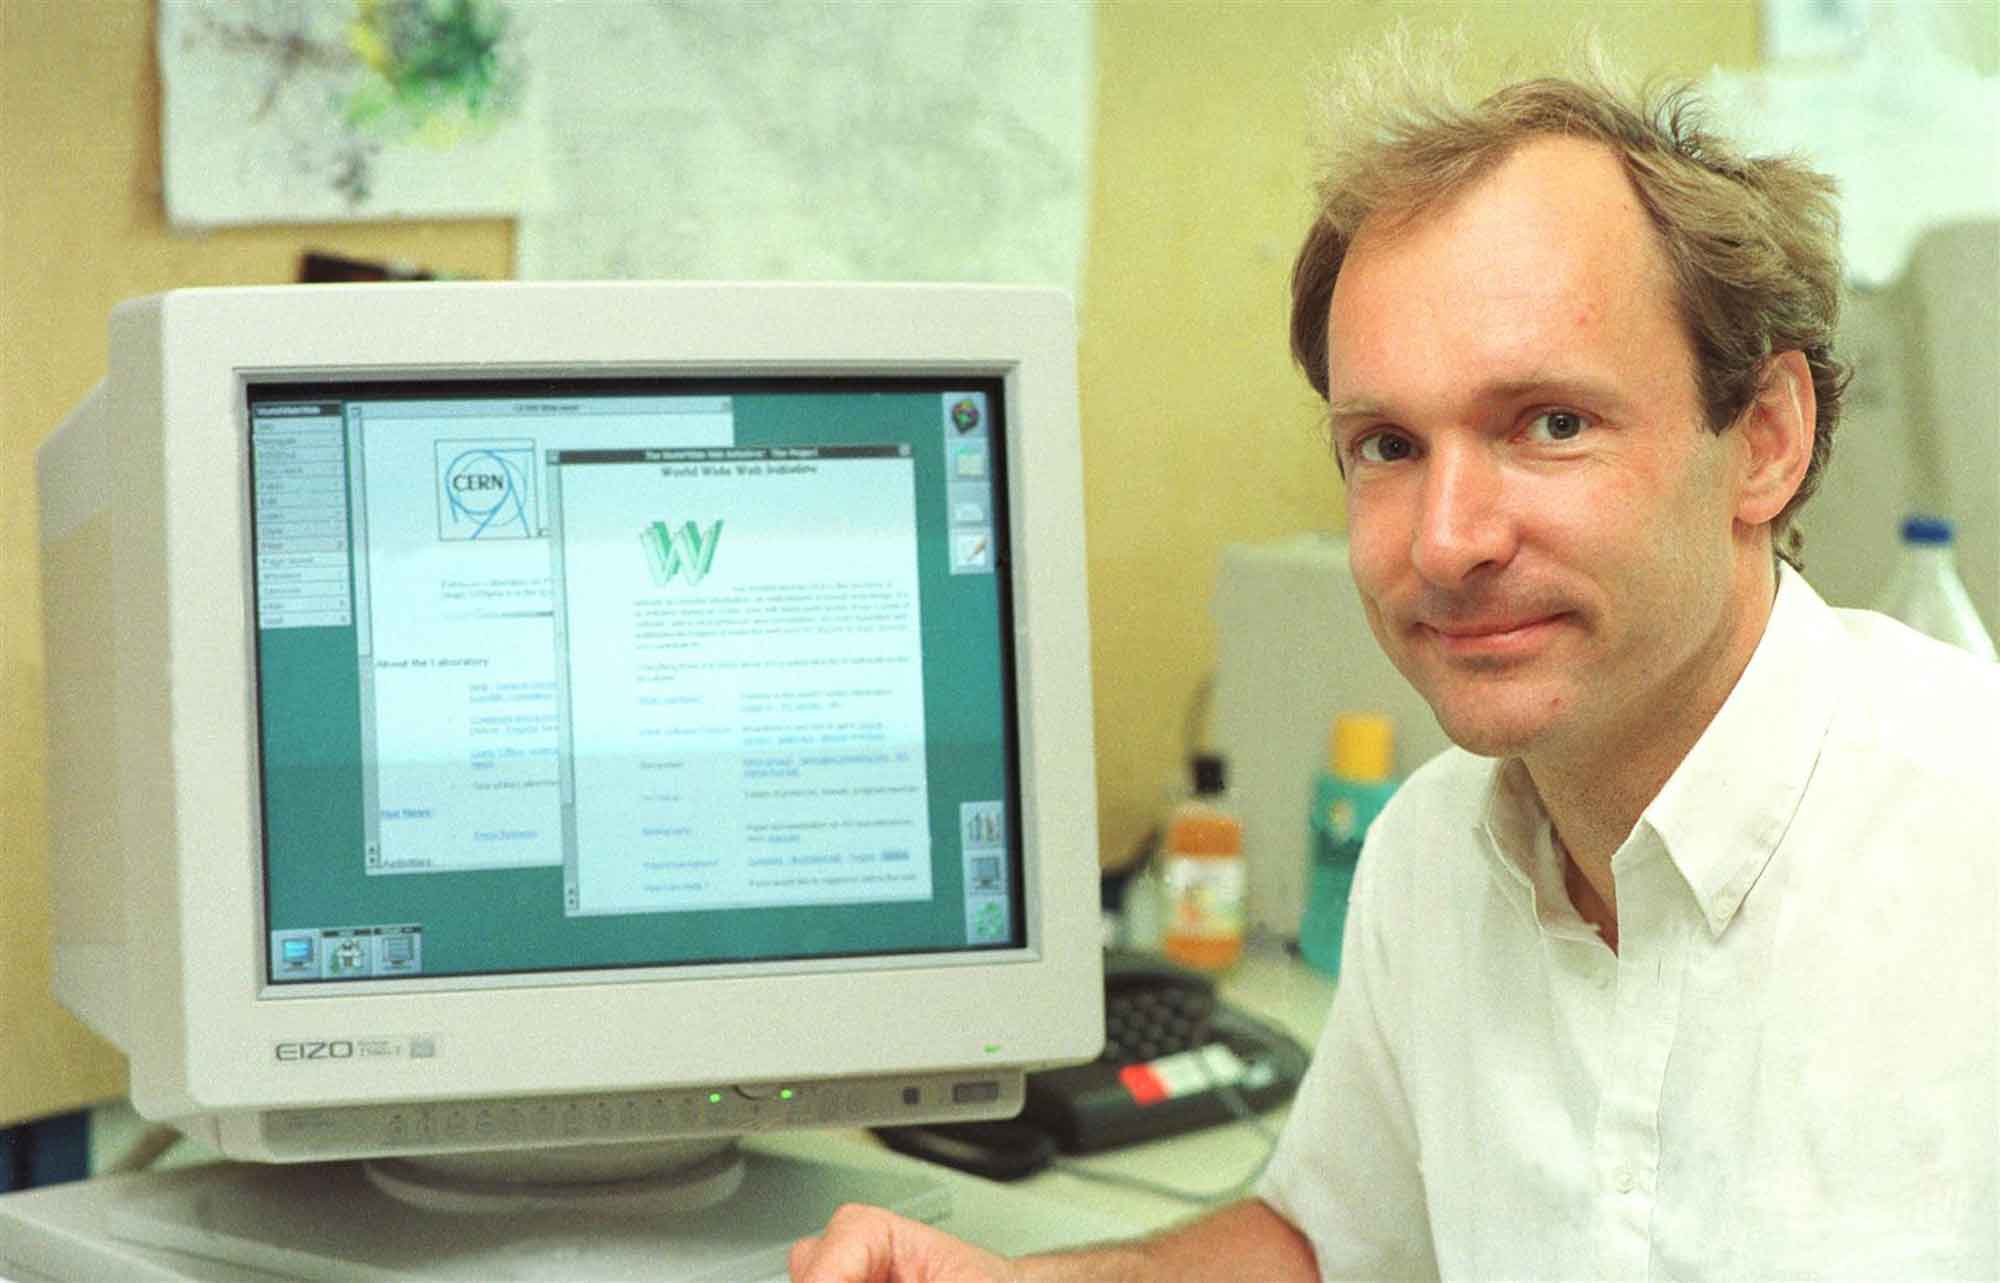 Sir Tim Berners-Lee invented the World Wide Web in 1989